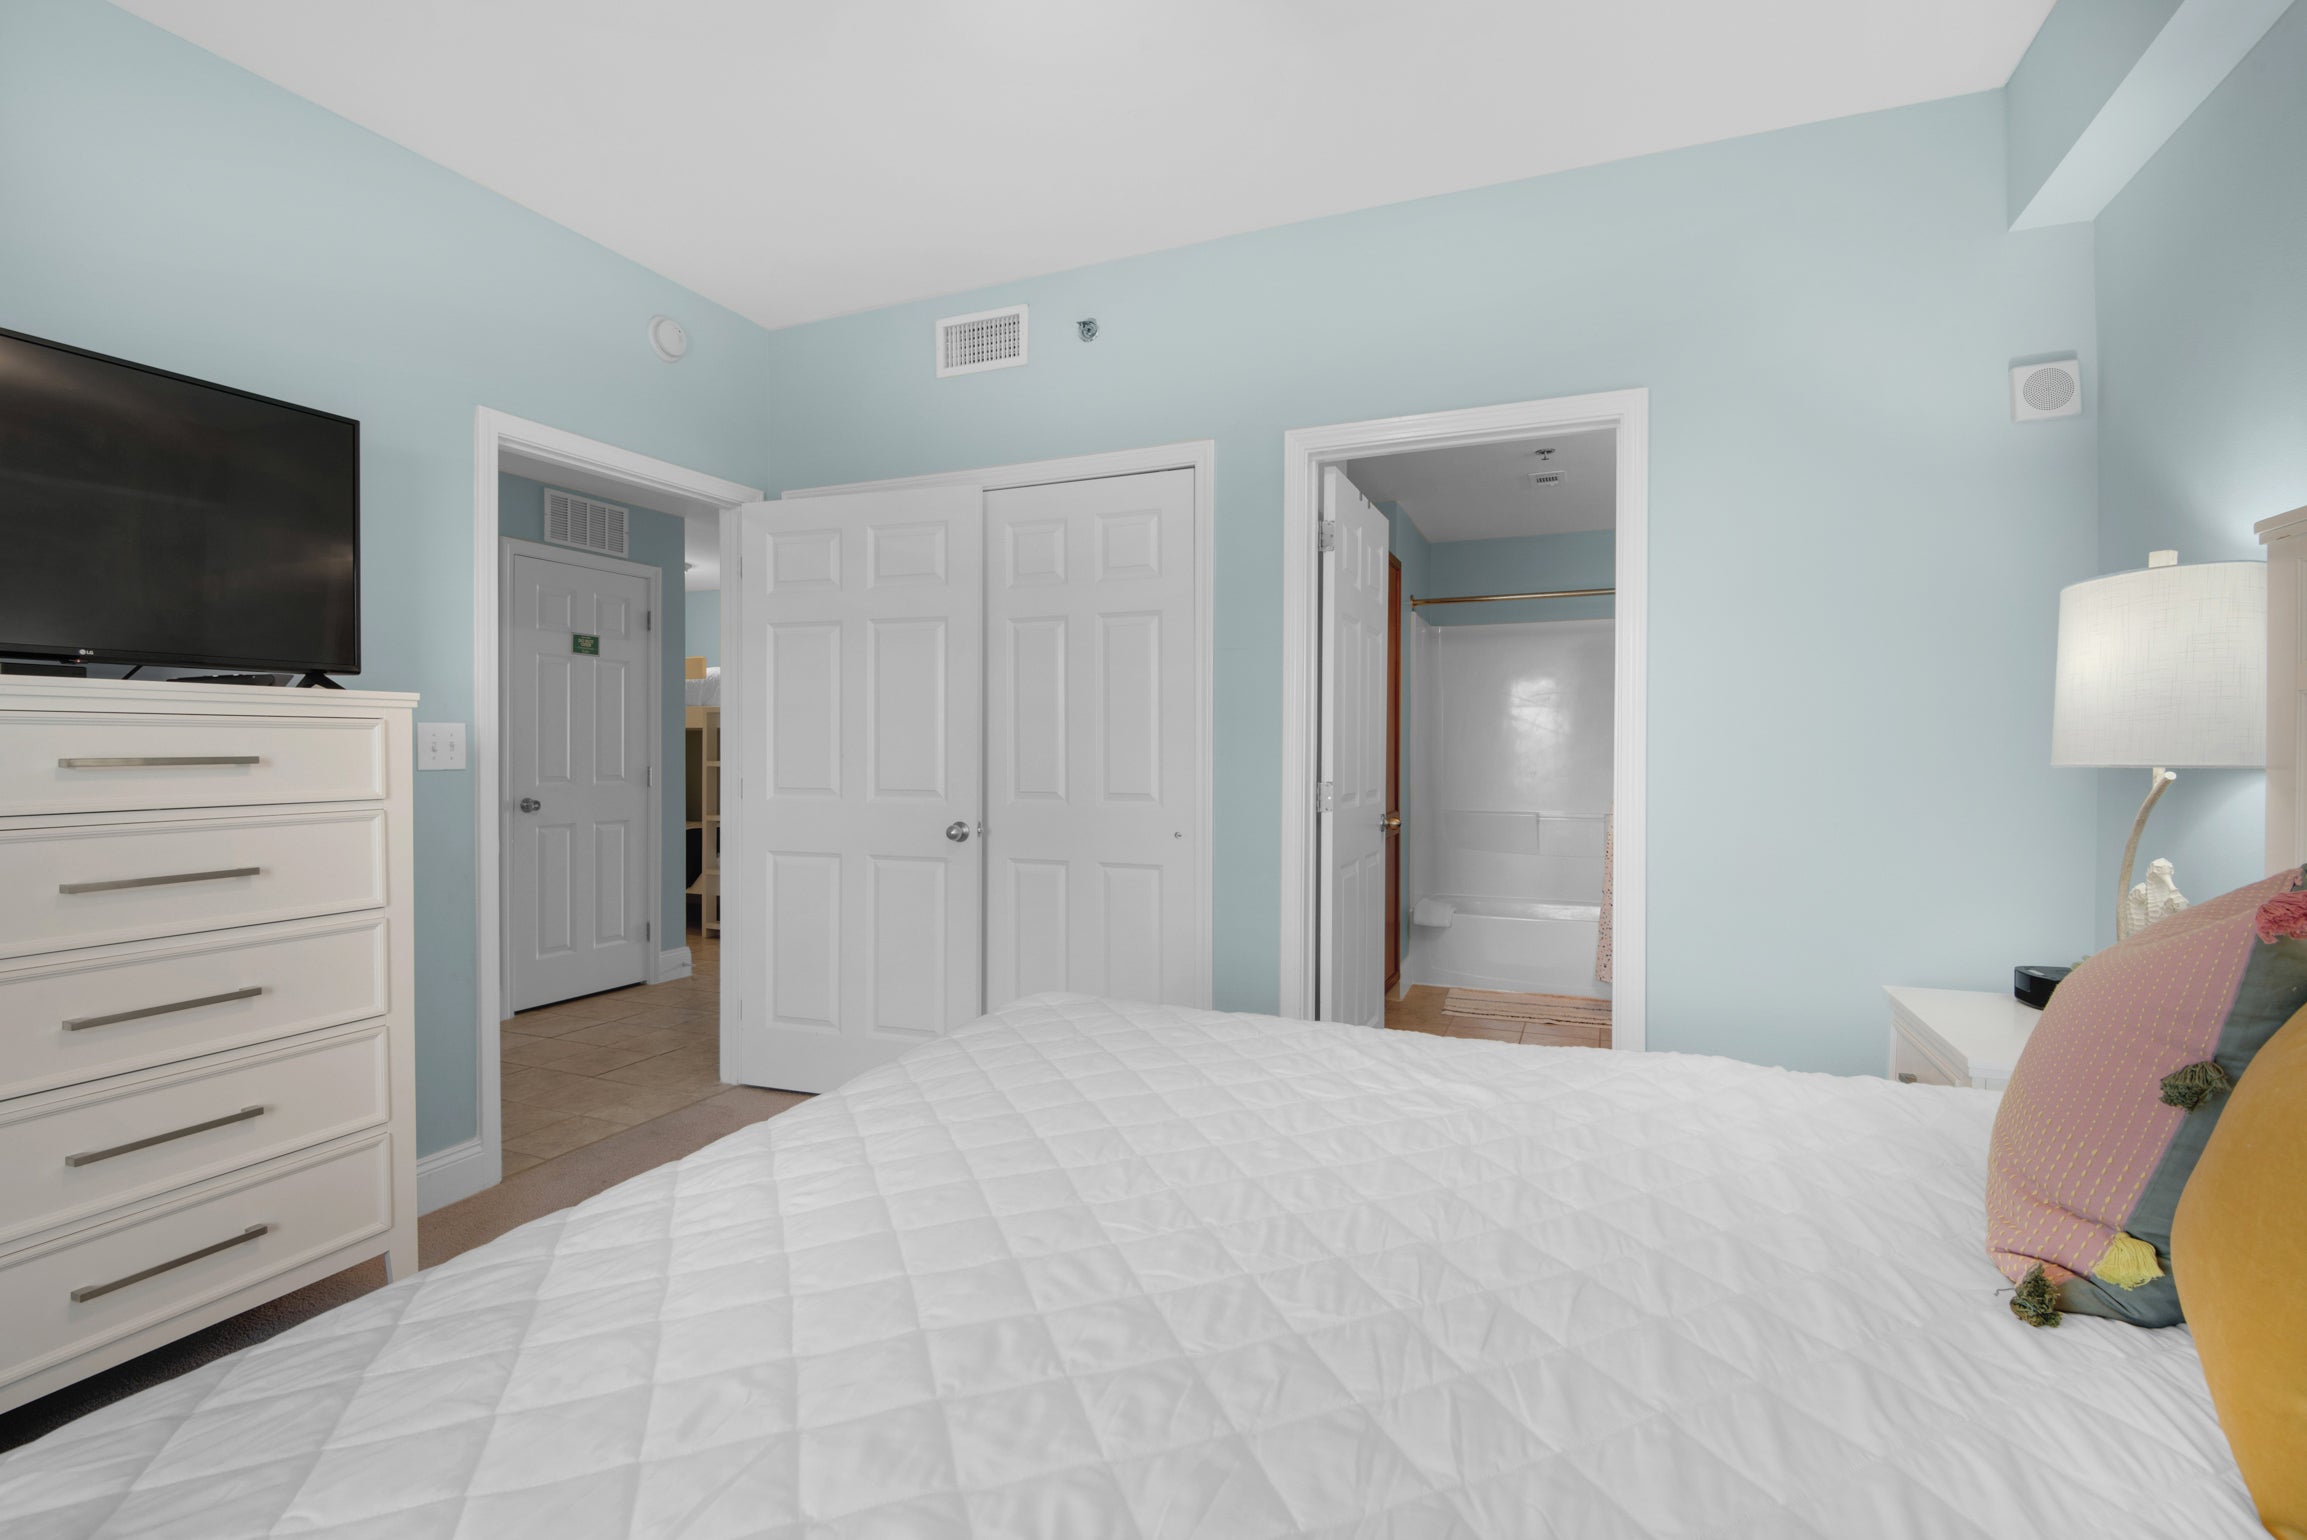 Guest Room with Attached Bathroom